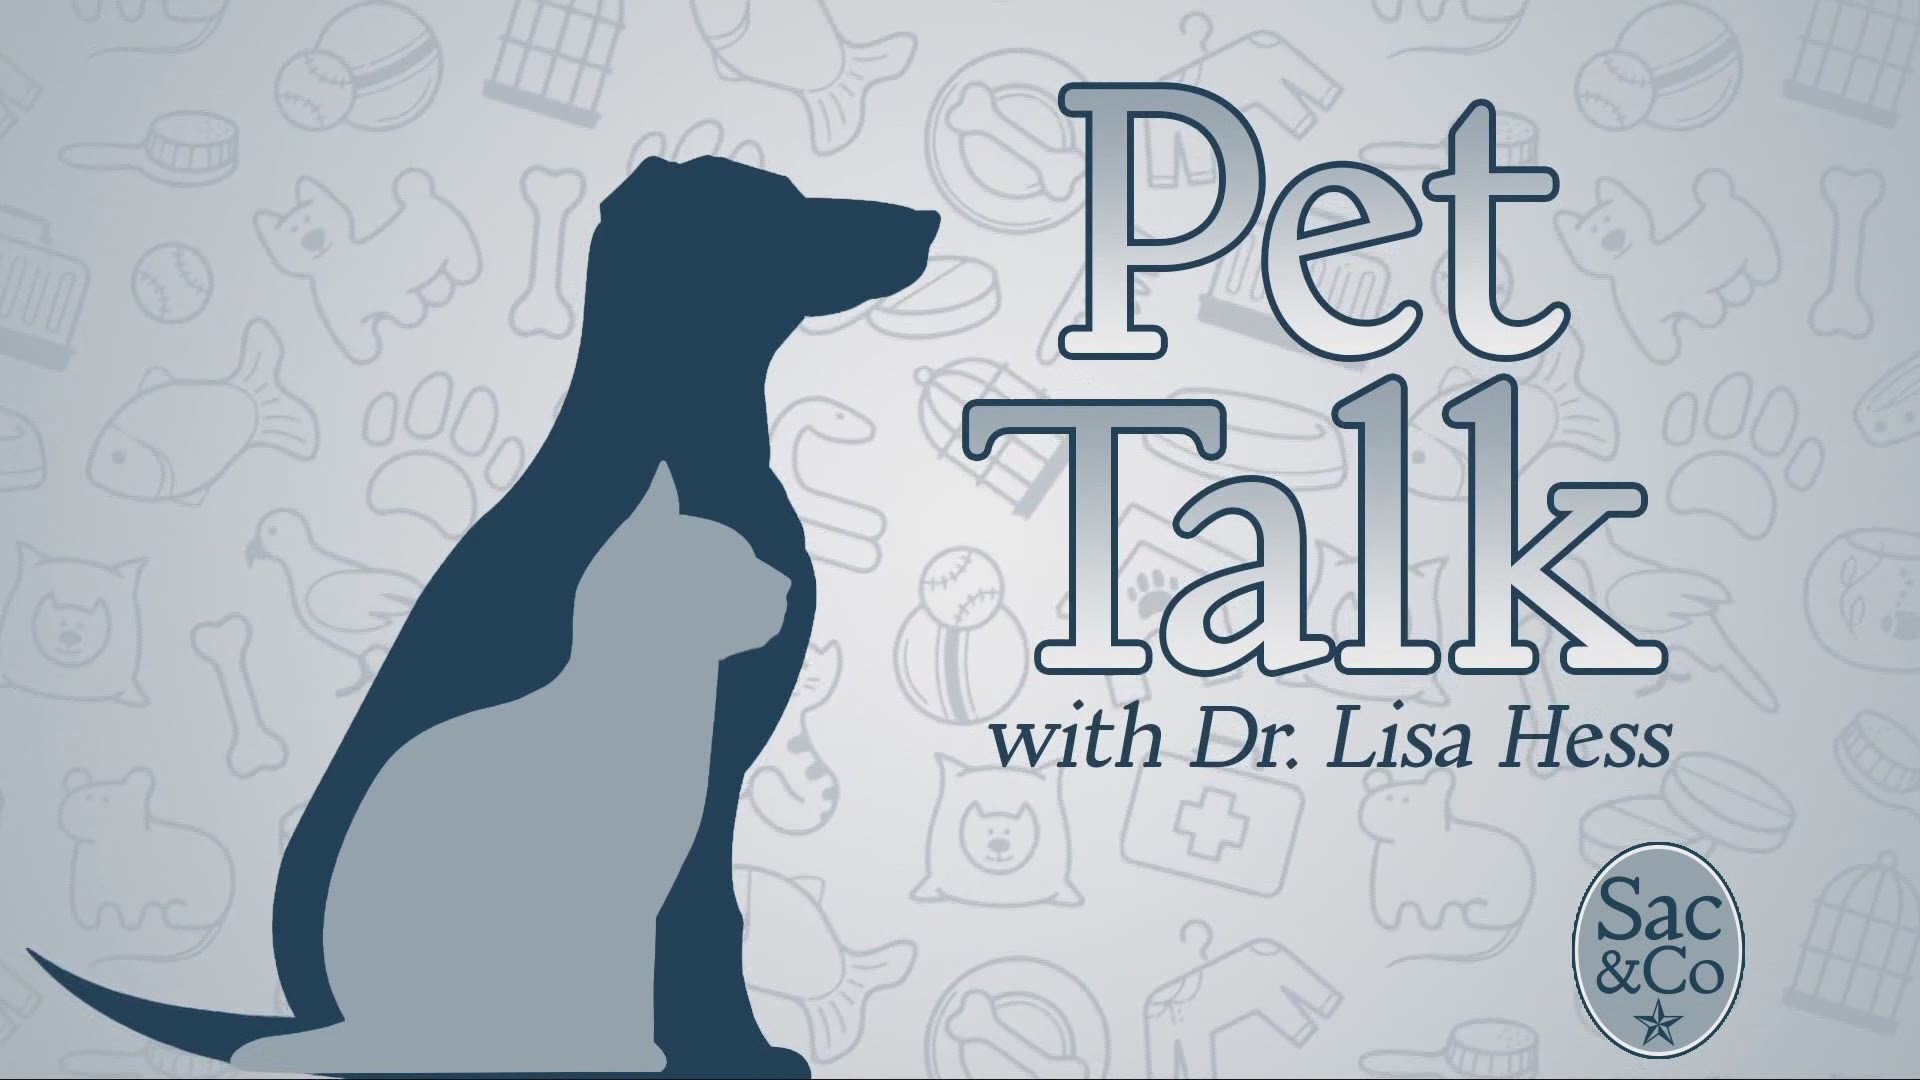 Tracy Sellers chats with Dr. Lisa Hess about how we can keep our fur babies safe!